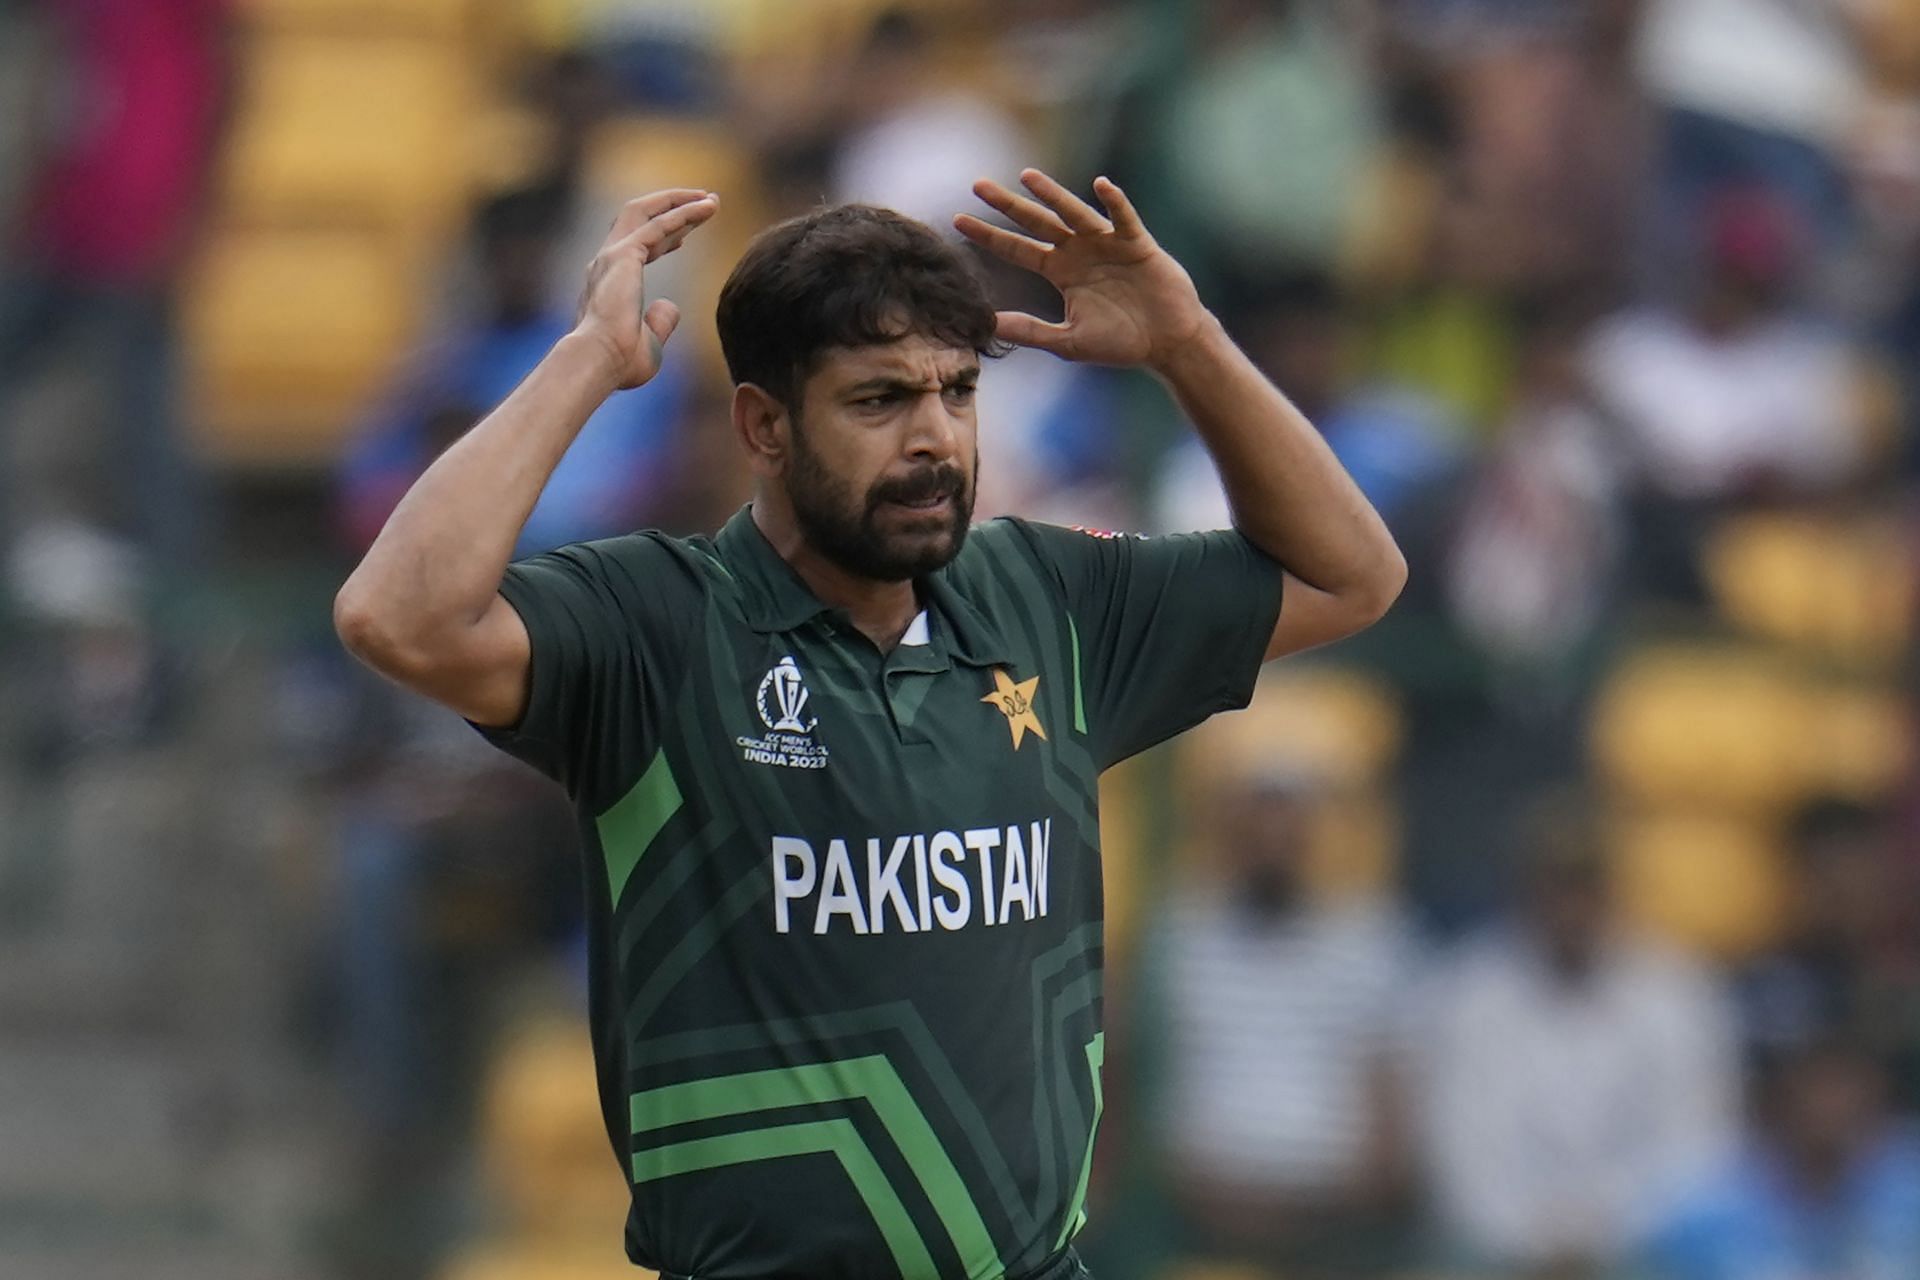 Haris Rauf (533) has conceded the most runs in a single edition of a World Cup. [P/C: AP]